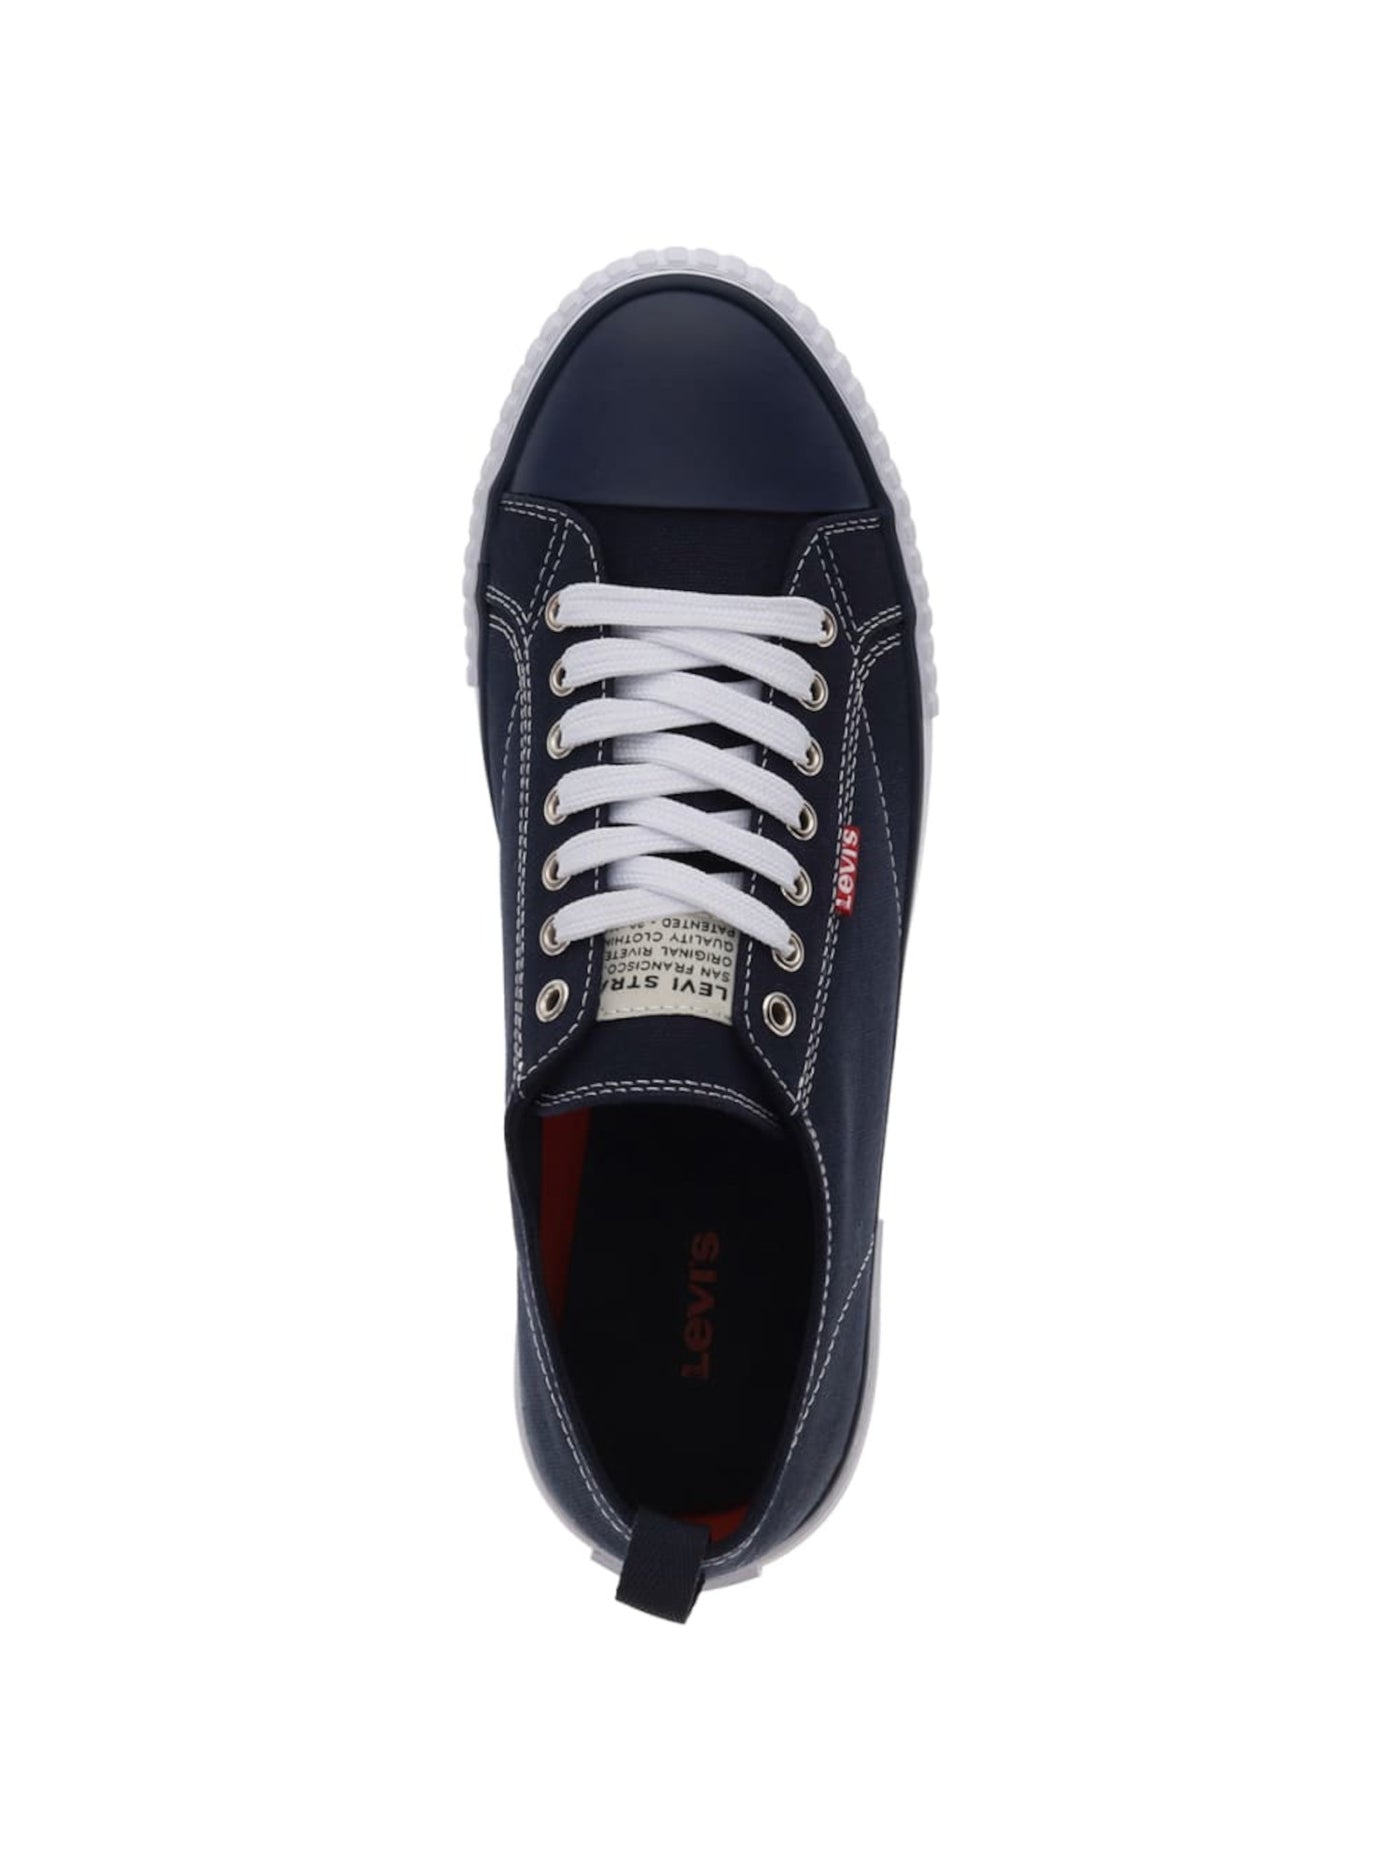 LEVI'S Mens Navy Removable Insole Cushioned Anikin Round Toe Lace-Up Sneakers Shoes 10 M